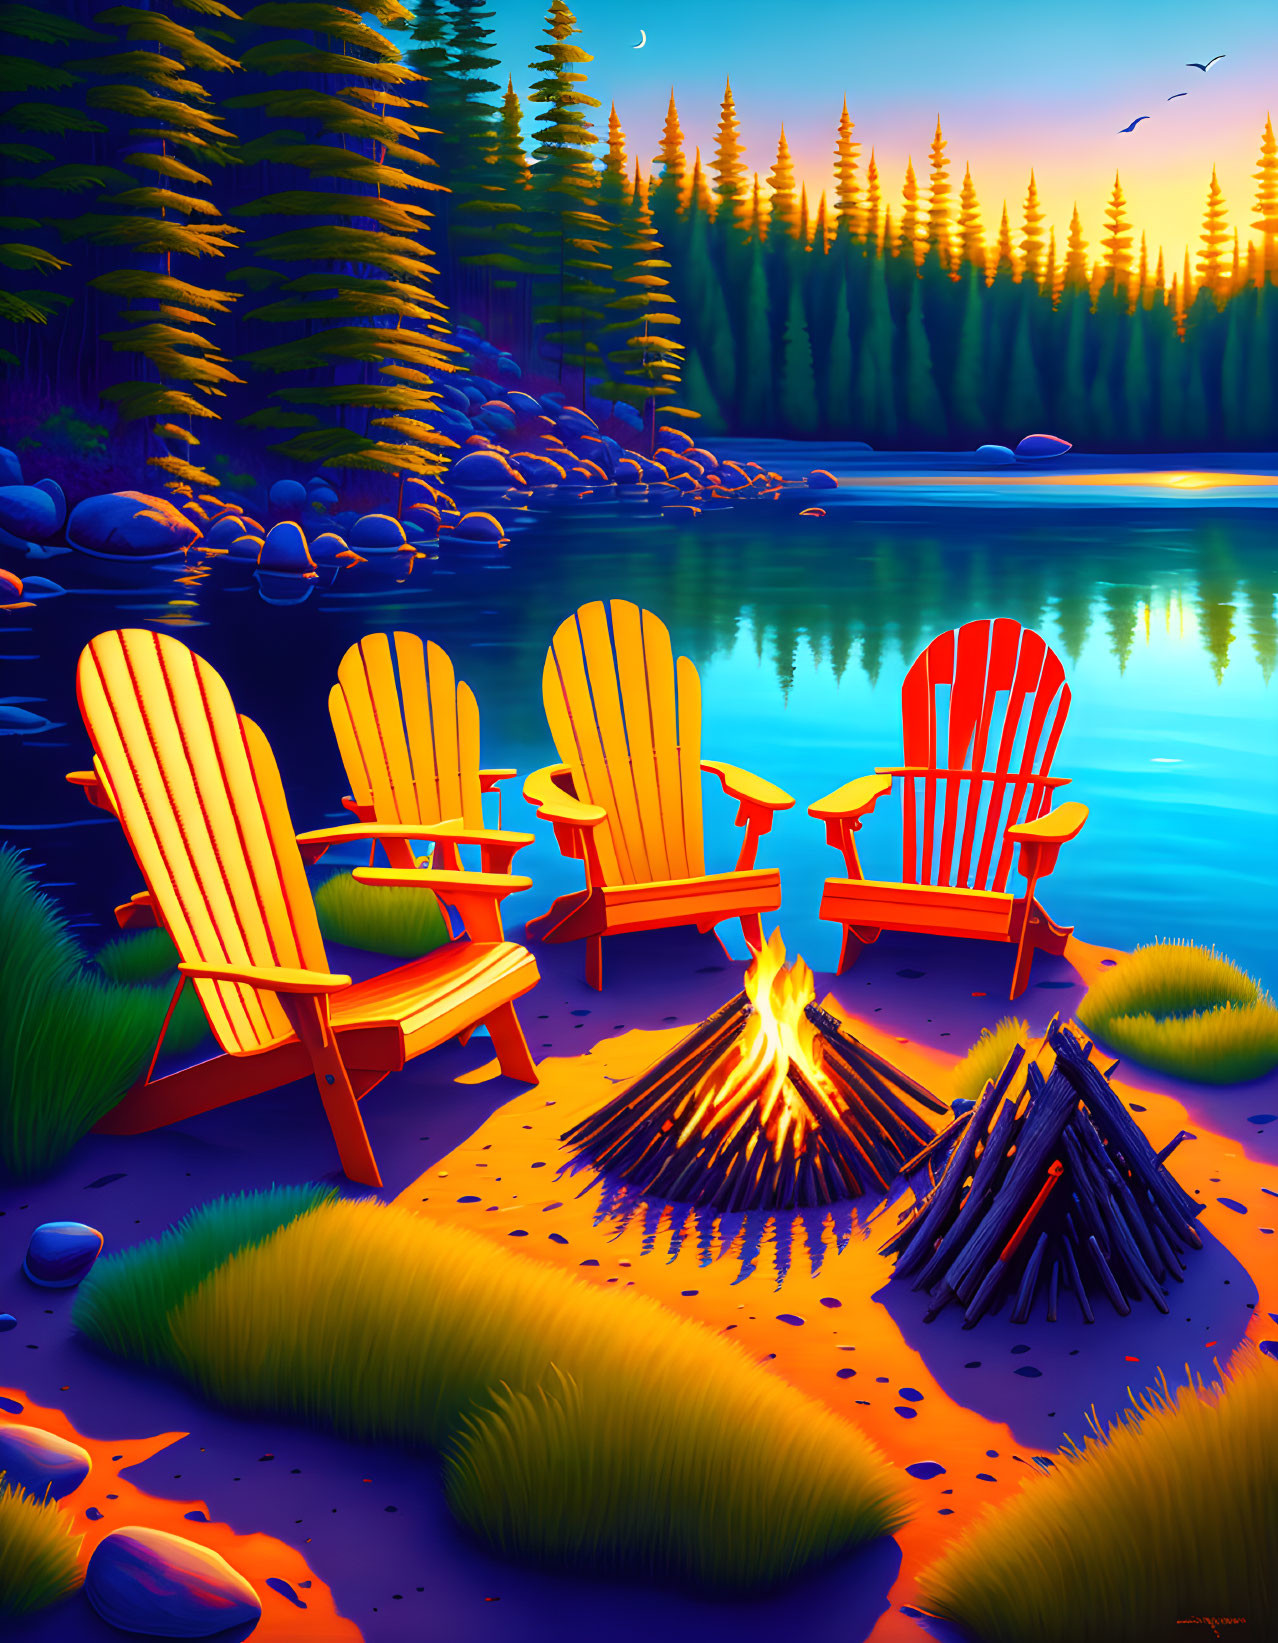 Scenic sunset view: Three colorful chairs by lake and bonfire